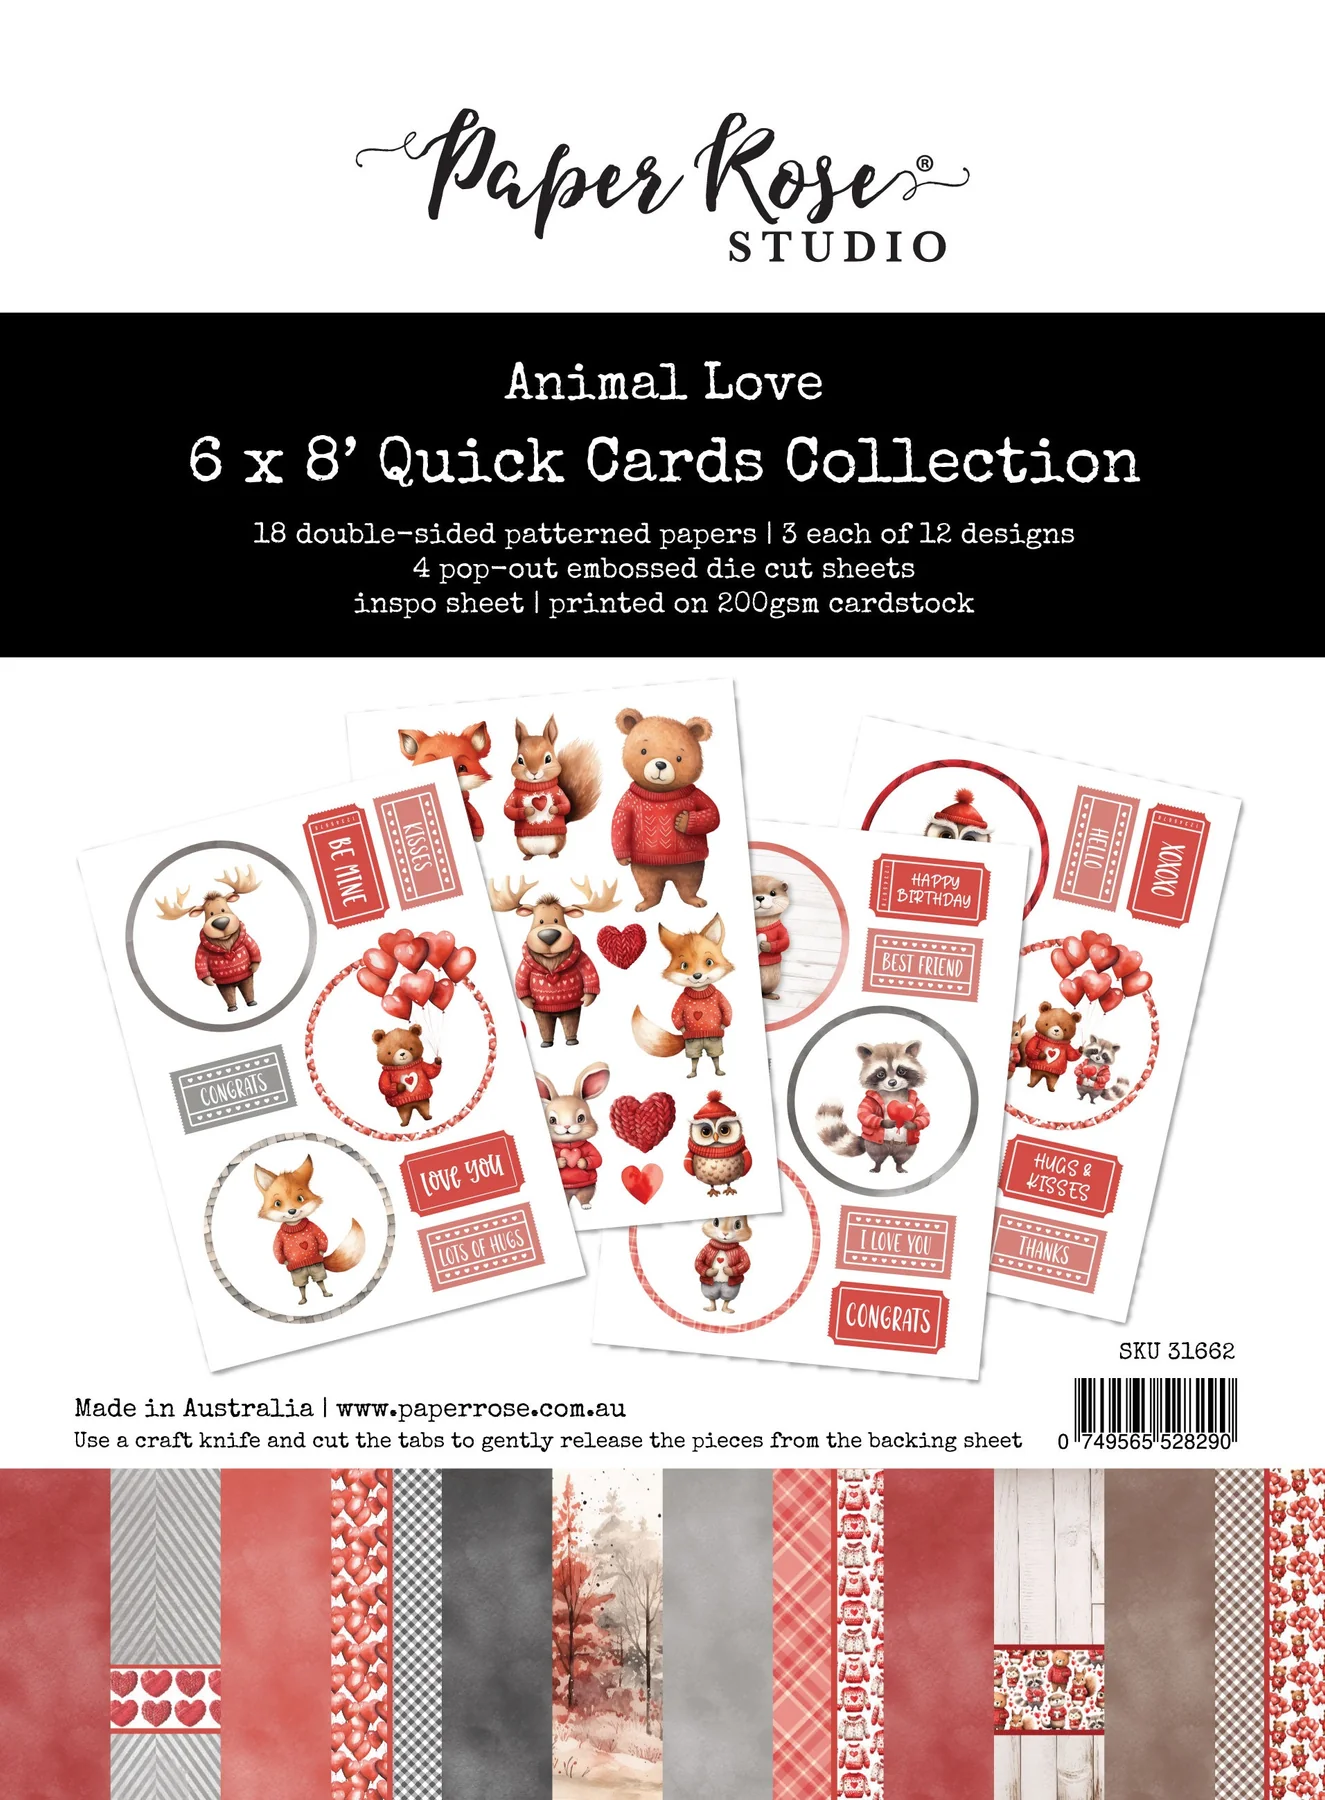 Animal Love 6x8" Quick Cards Collection 31662